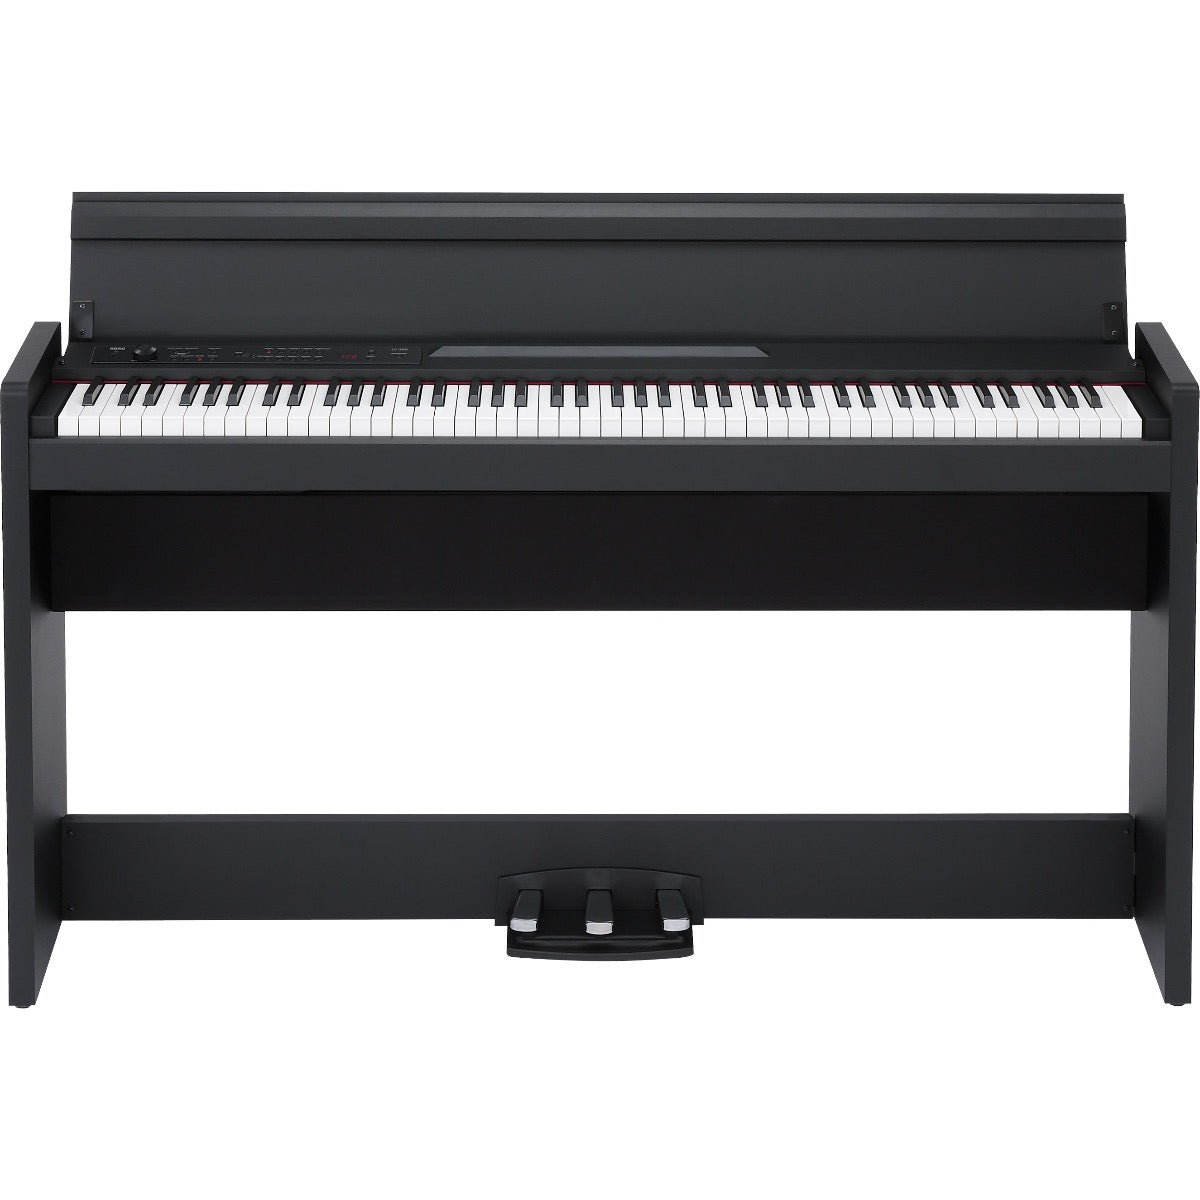 Perspective view of Korg LP-380U Digital Piano - Black showing top and front